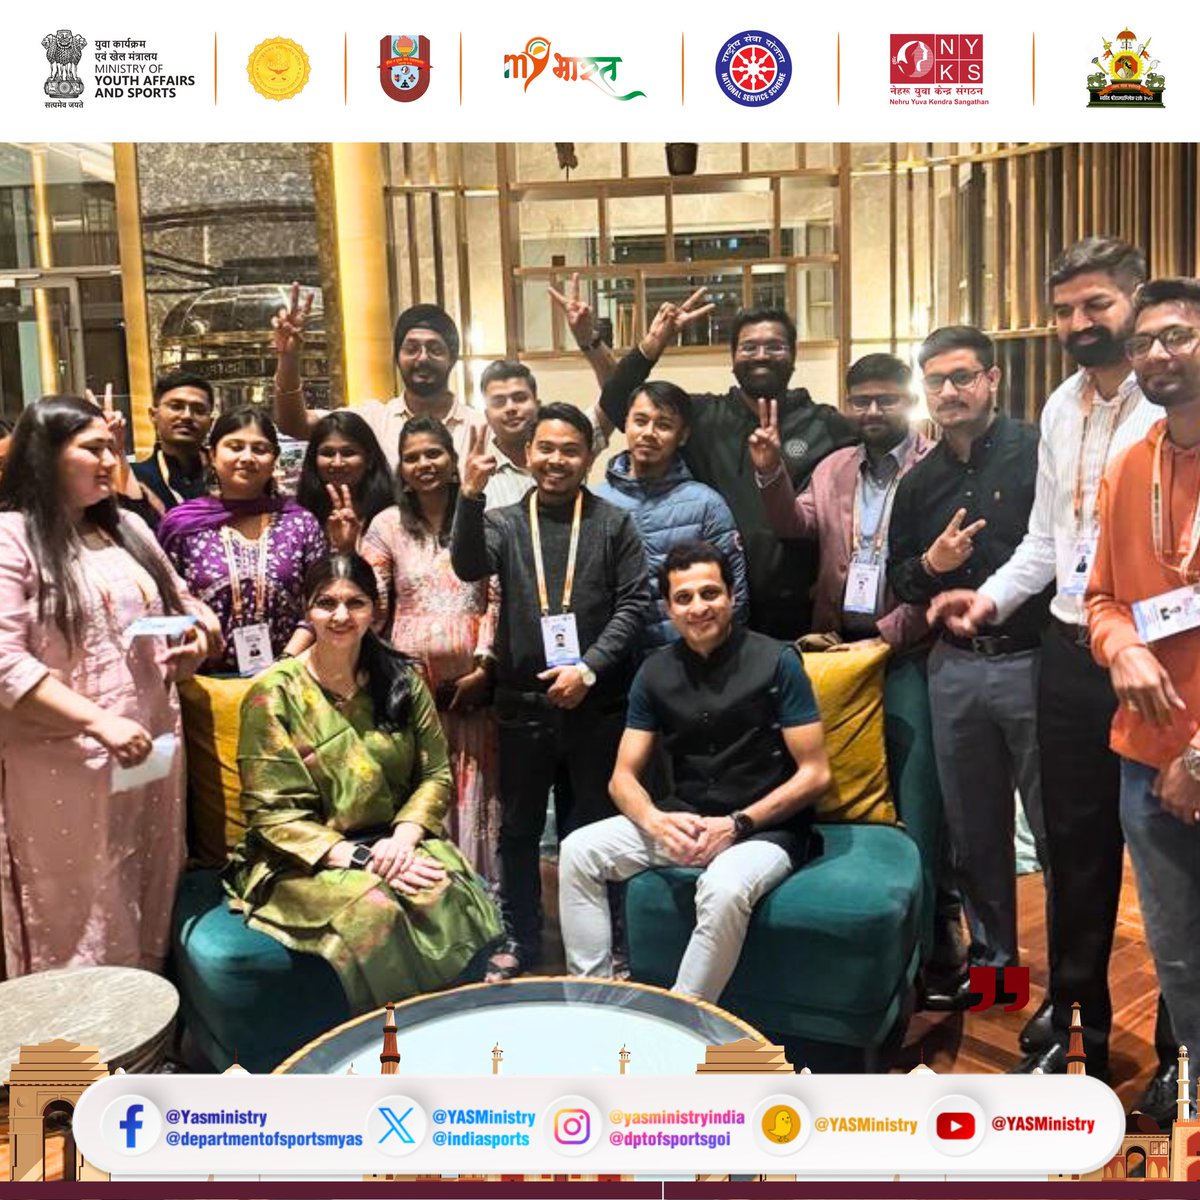 Capturing the vibrant moments of excitement at the #NationalYouthFestival2024 as National Youth Awardees share smiles & joy during an interaction with the Director, Smt. Vanita Sood & Under Secretary, Shri Dharmendra Kumar Yadav from the @YASMinistry. #NYF2024